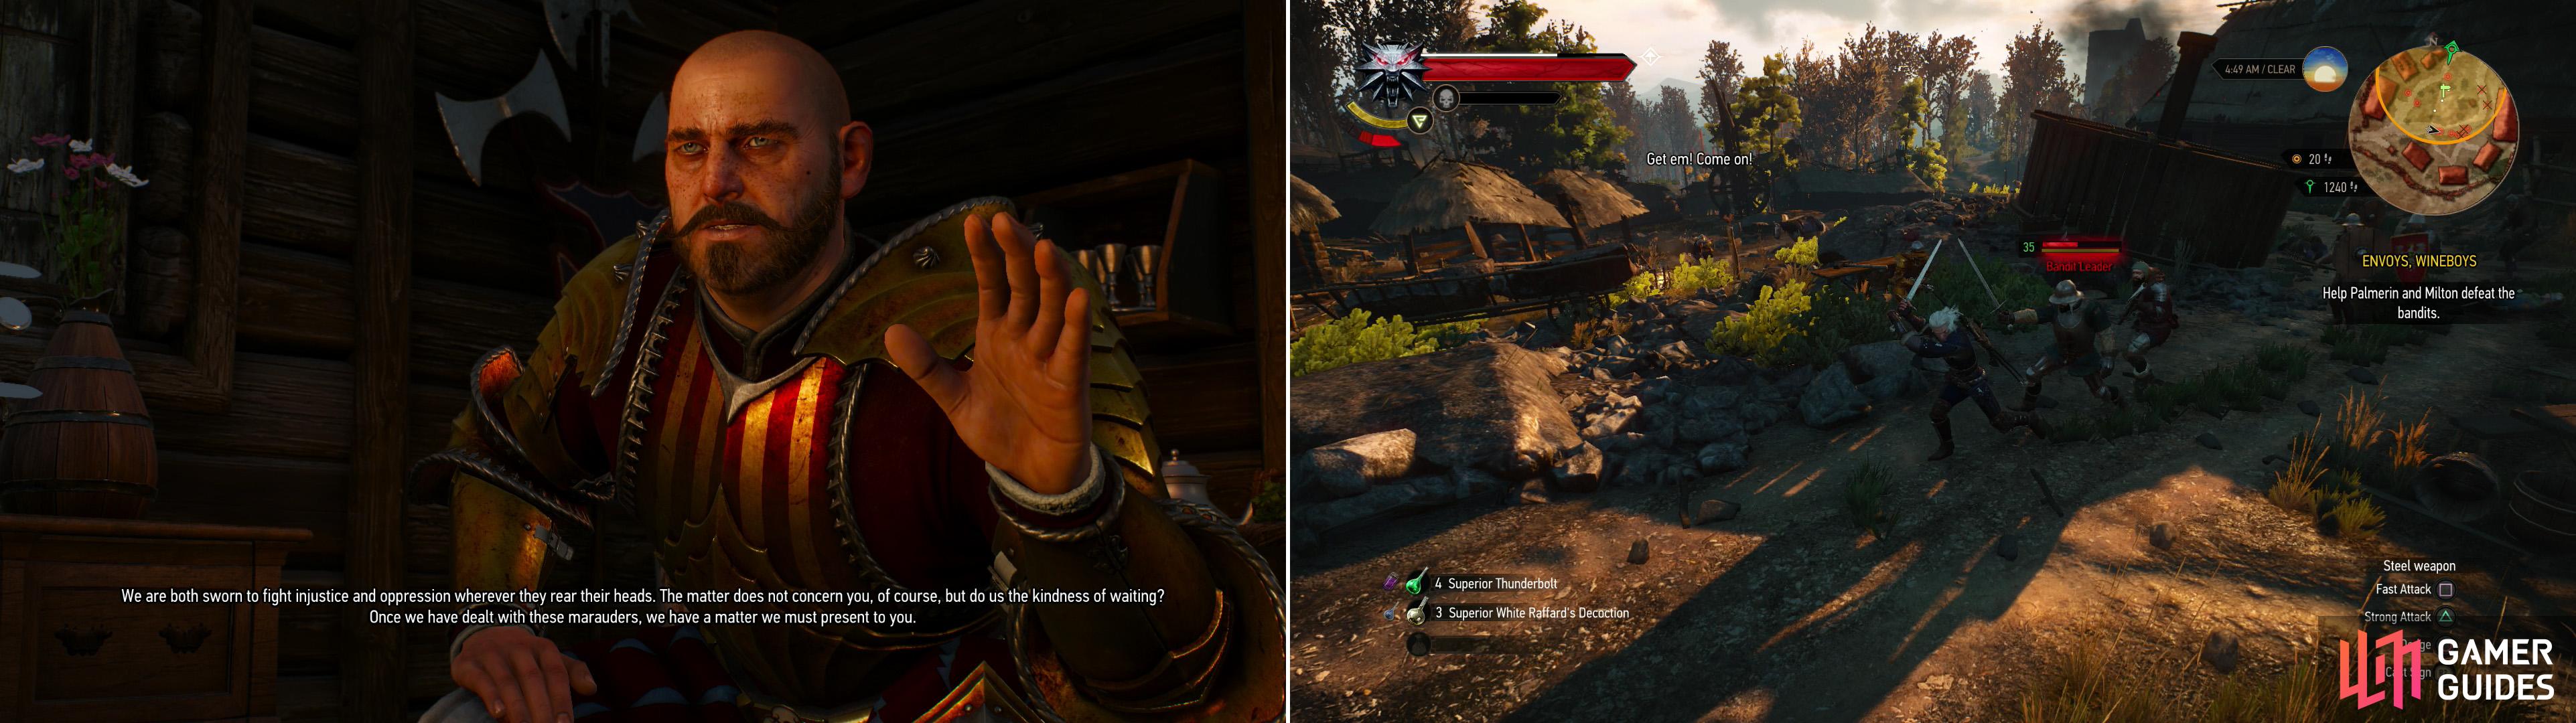 In the village of Stonecutter's Settlement you'll find two knights from Toussaint (left), who have a bit of business for you after they deal with some bandits (right).